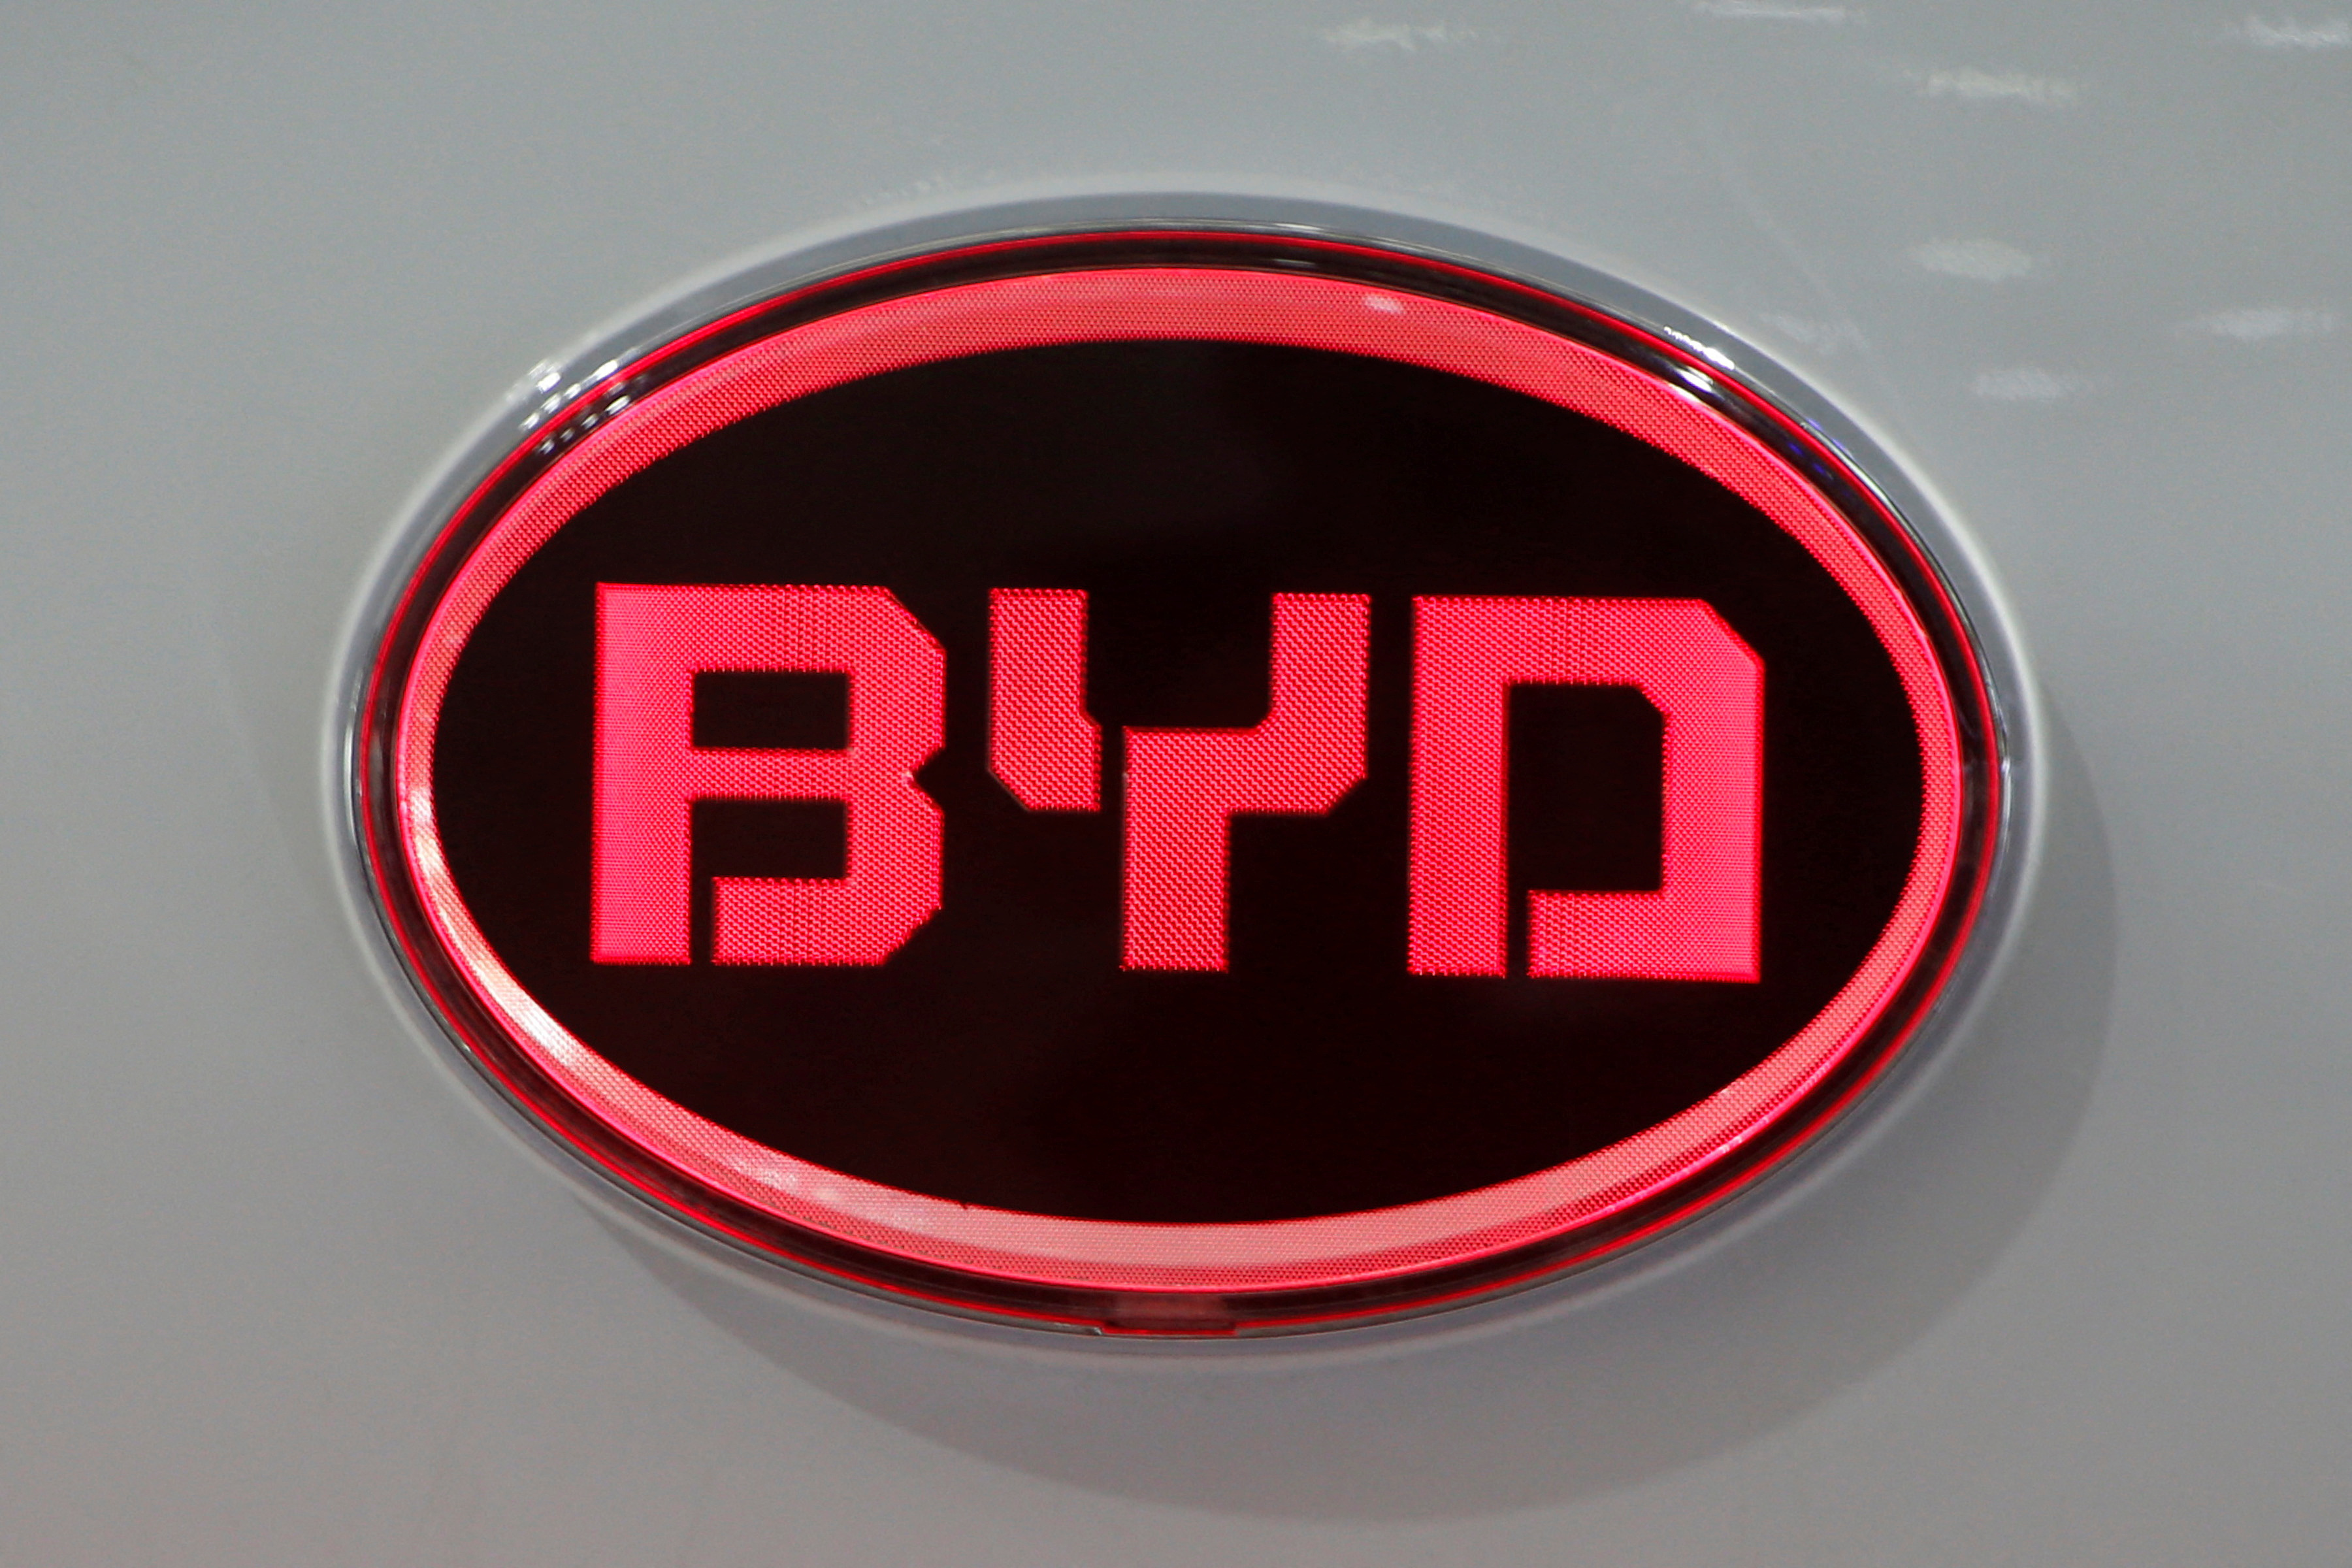 The BYD logo is pictures on its Qin EV300 model during the Auto China 2016 auto show in Beijing